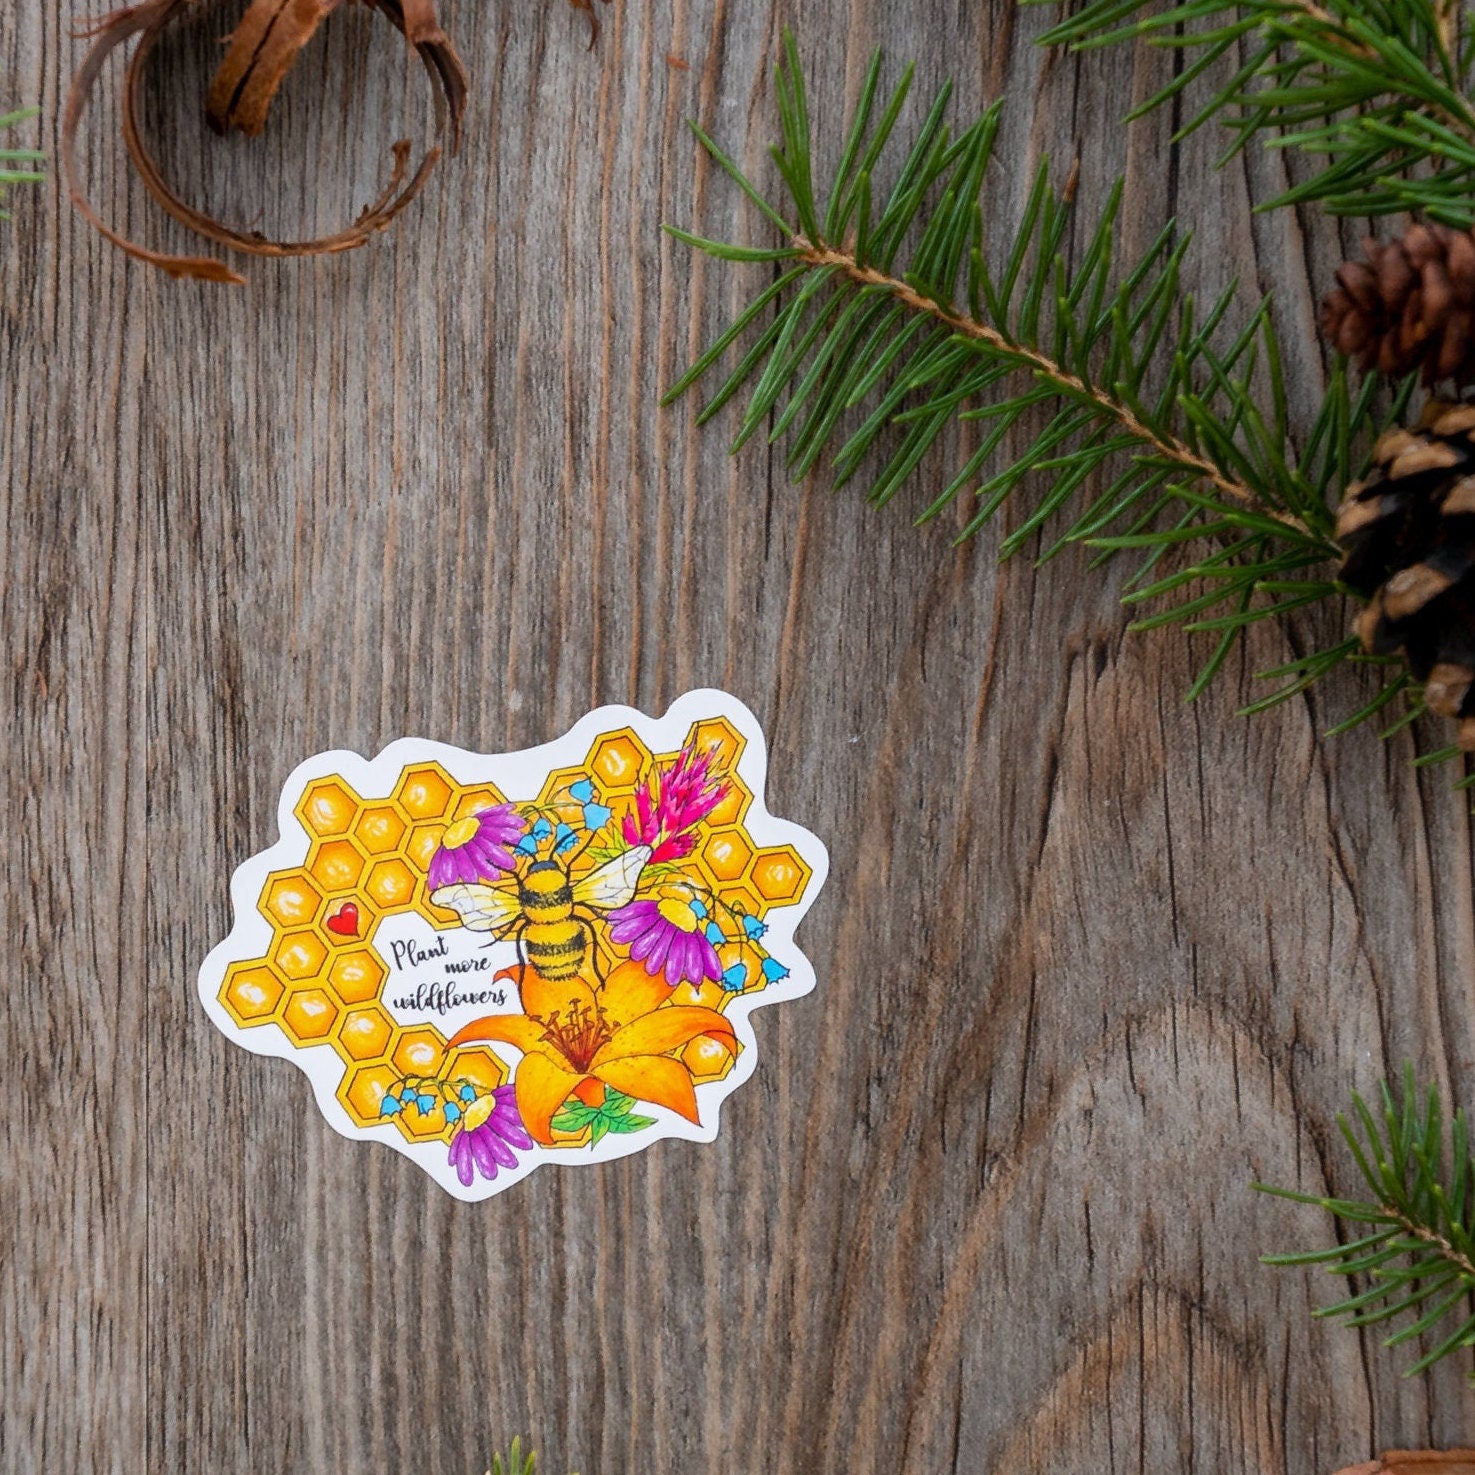 Plant More Wildflowers Sticker ⌲ Small 2.5"x2"